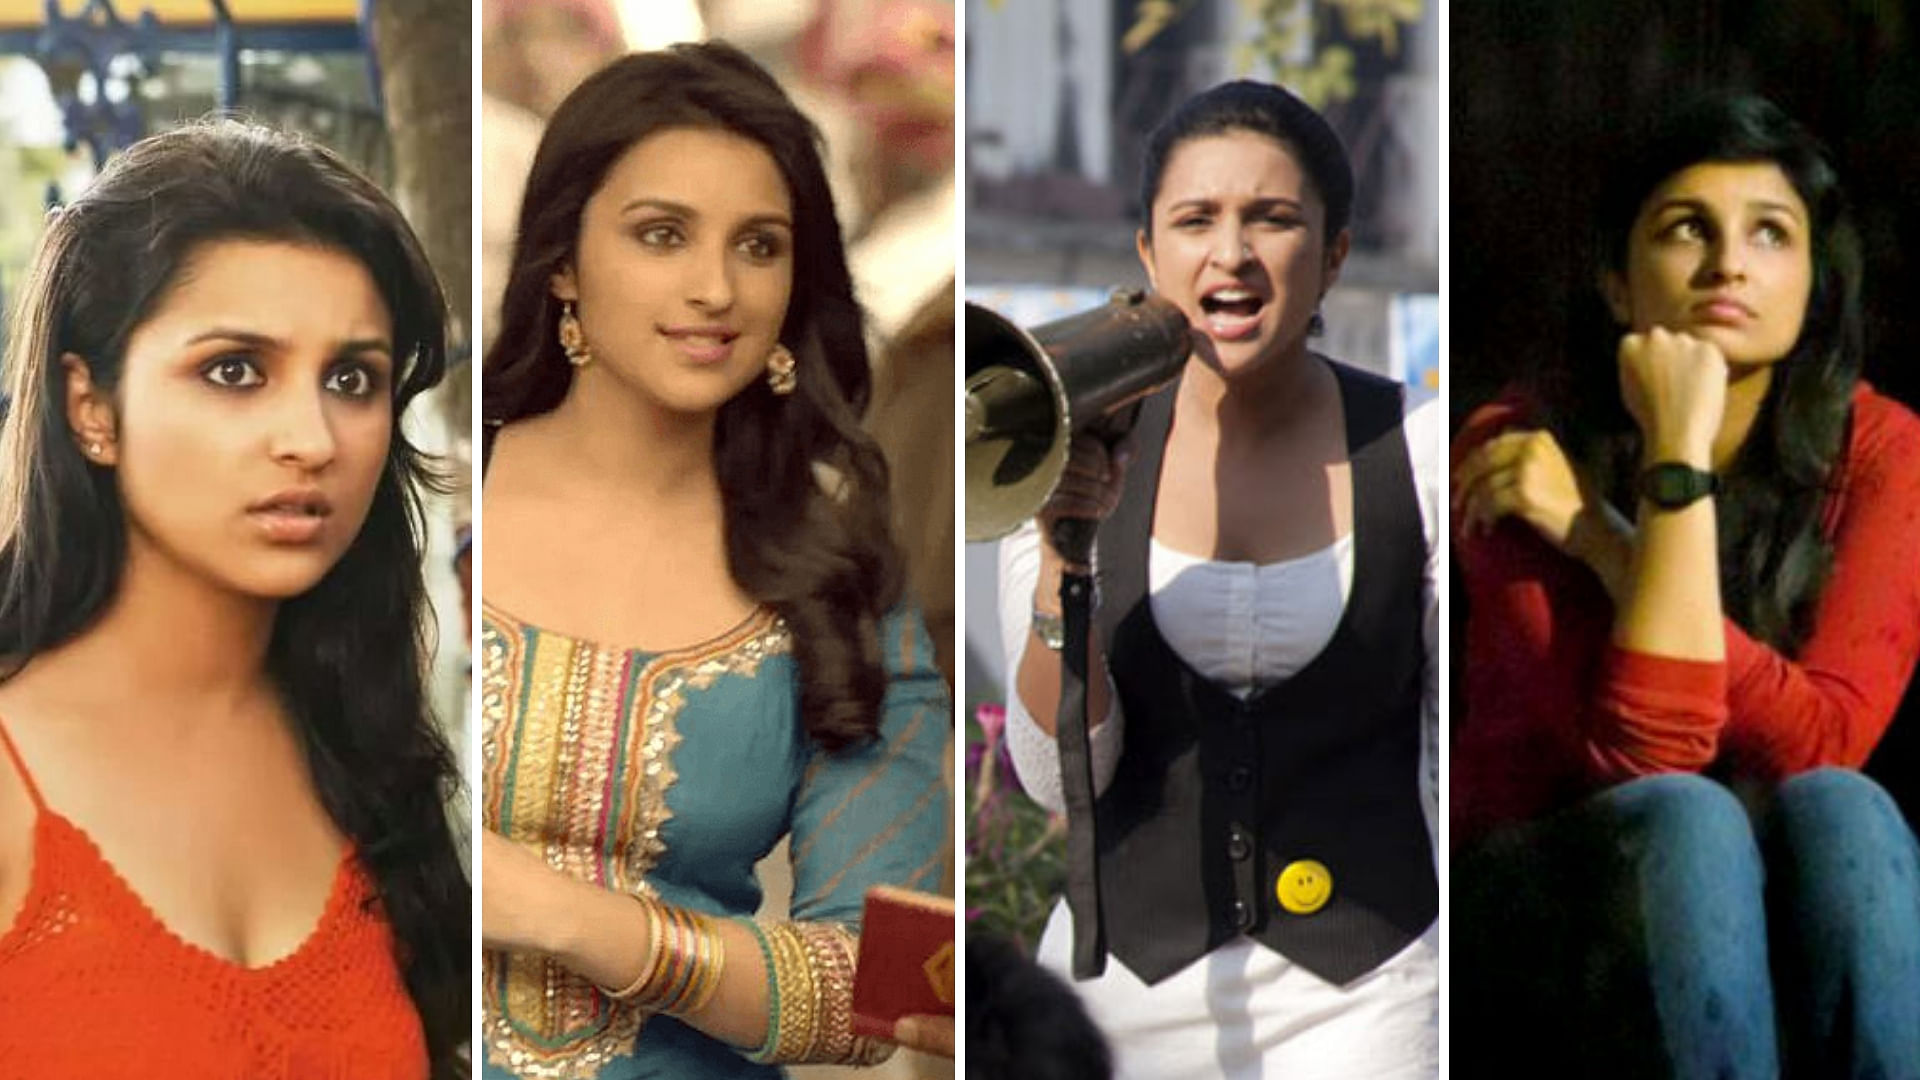 As Parineeti turns a year older, we look back at her best performances.